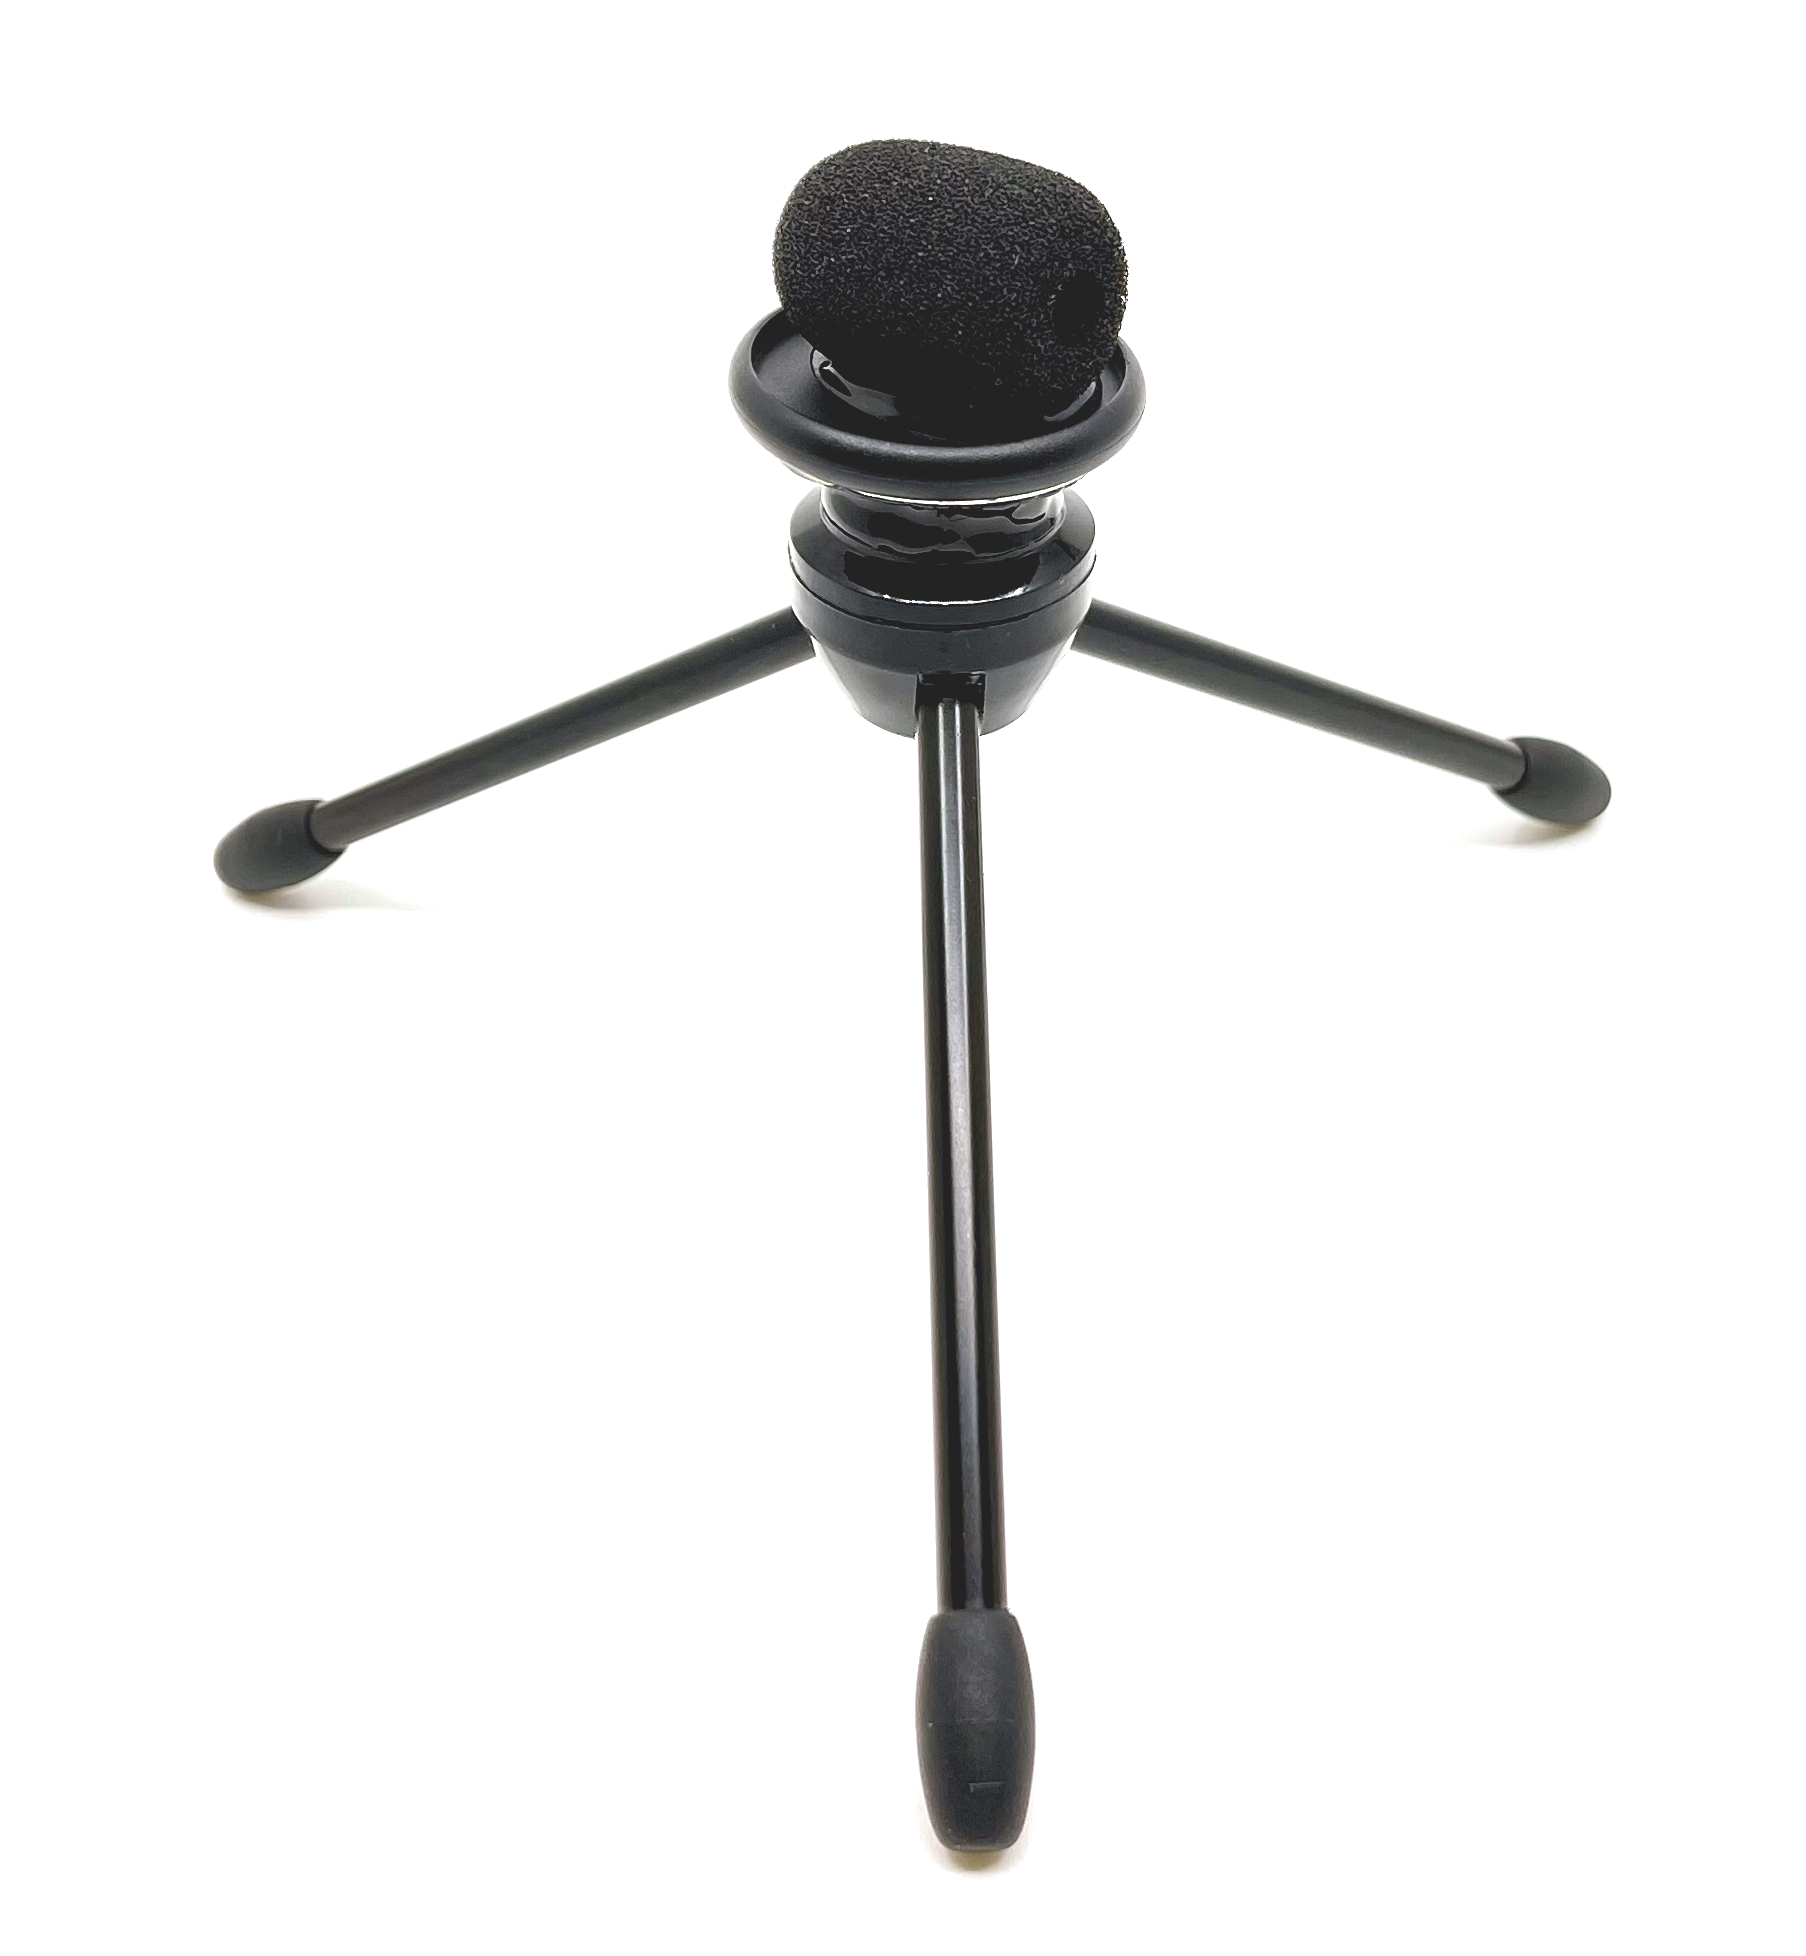 Does the microphone attach to the tripod?  It looks like it is just sitting on it.